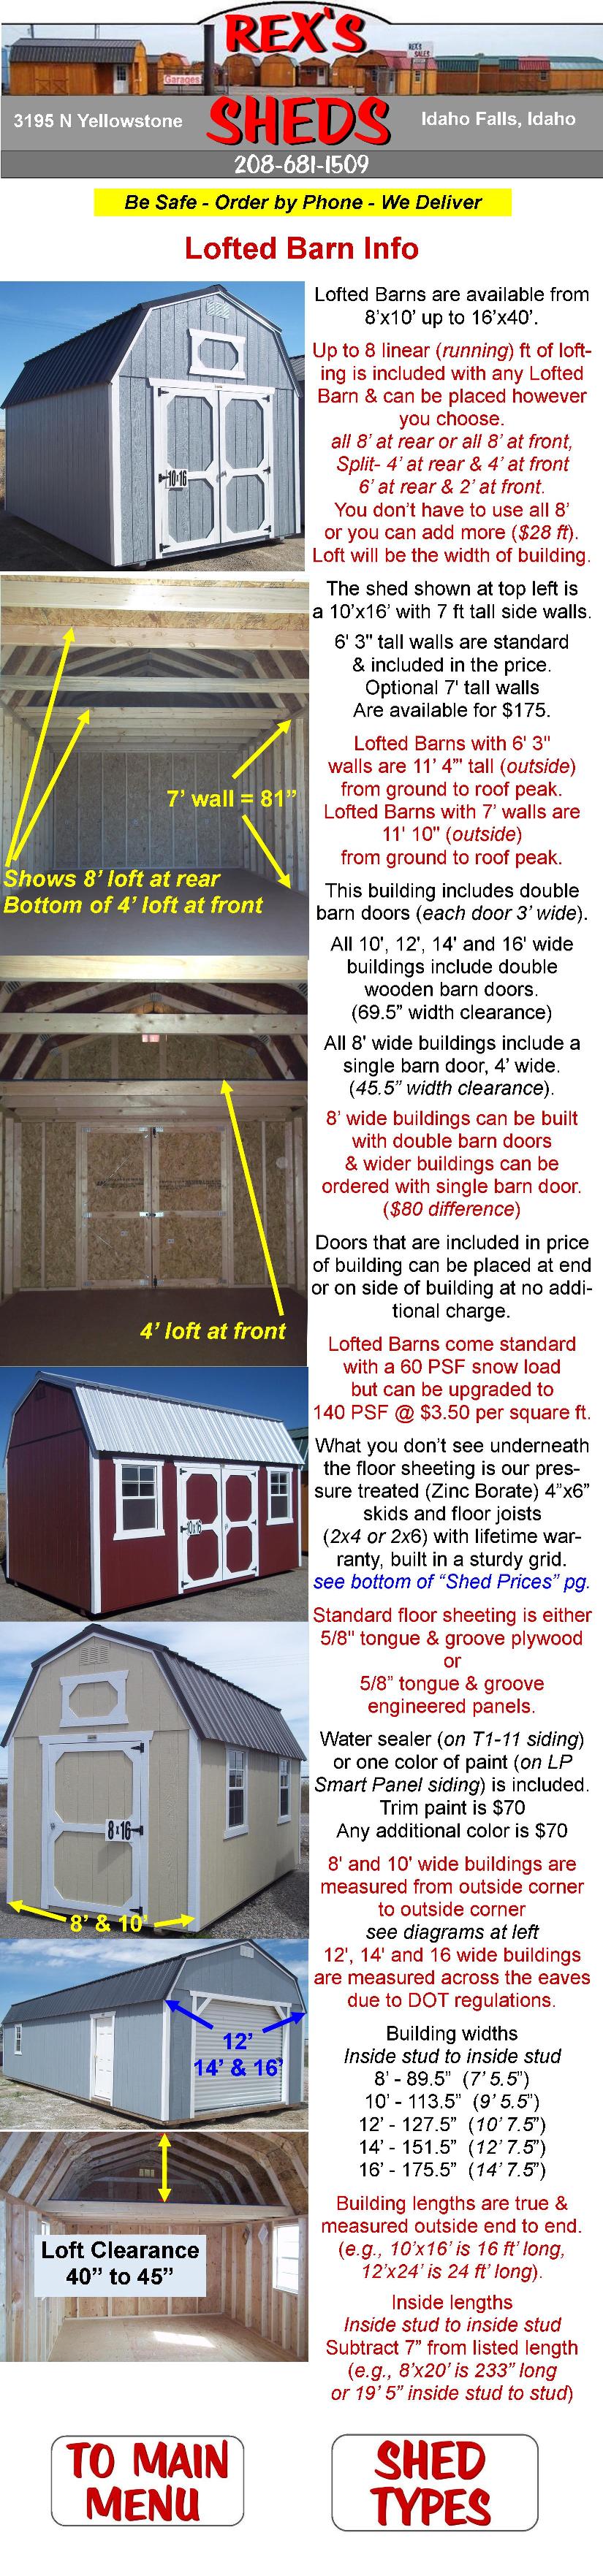 image_of_and_info_on_lofted_barn_storage_sheds_including_construction_style_snow_load_capacity_measurements_siding_doors_more